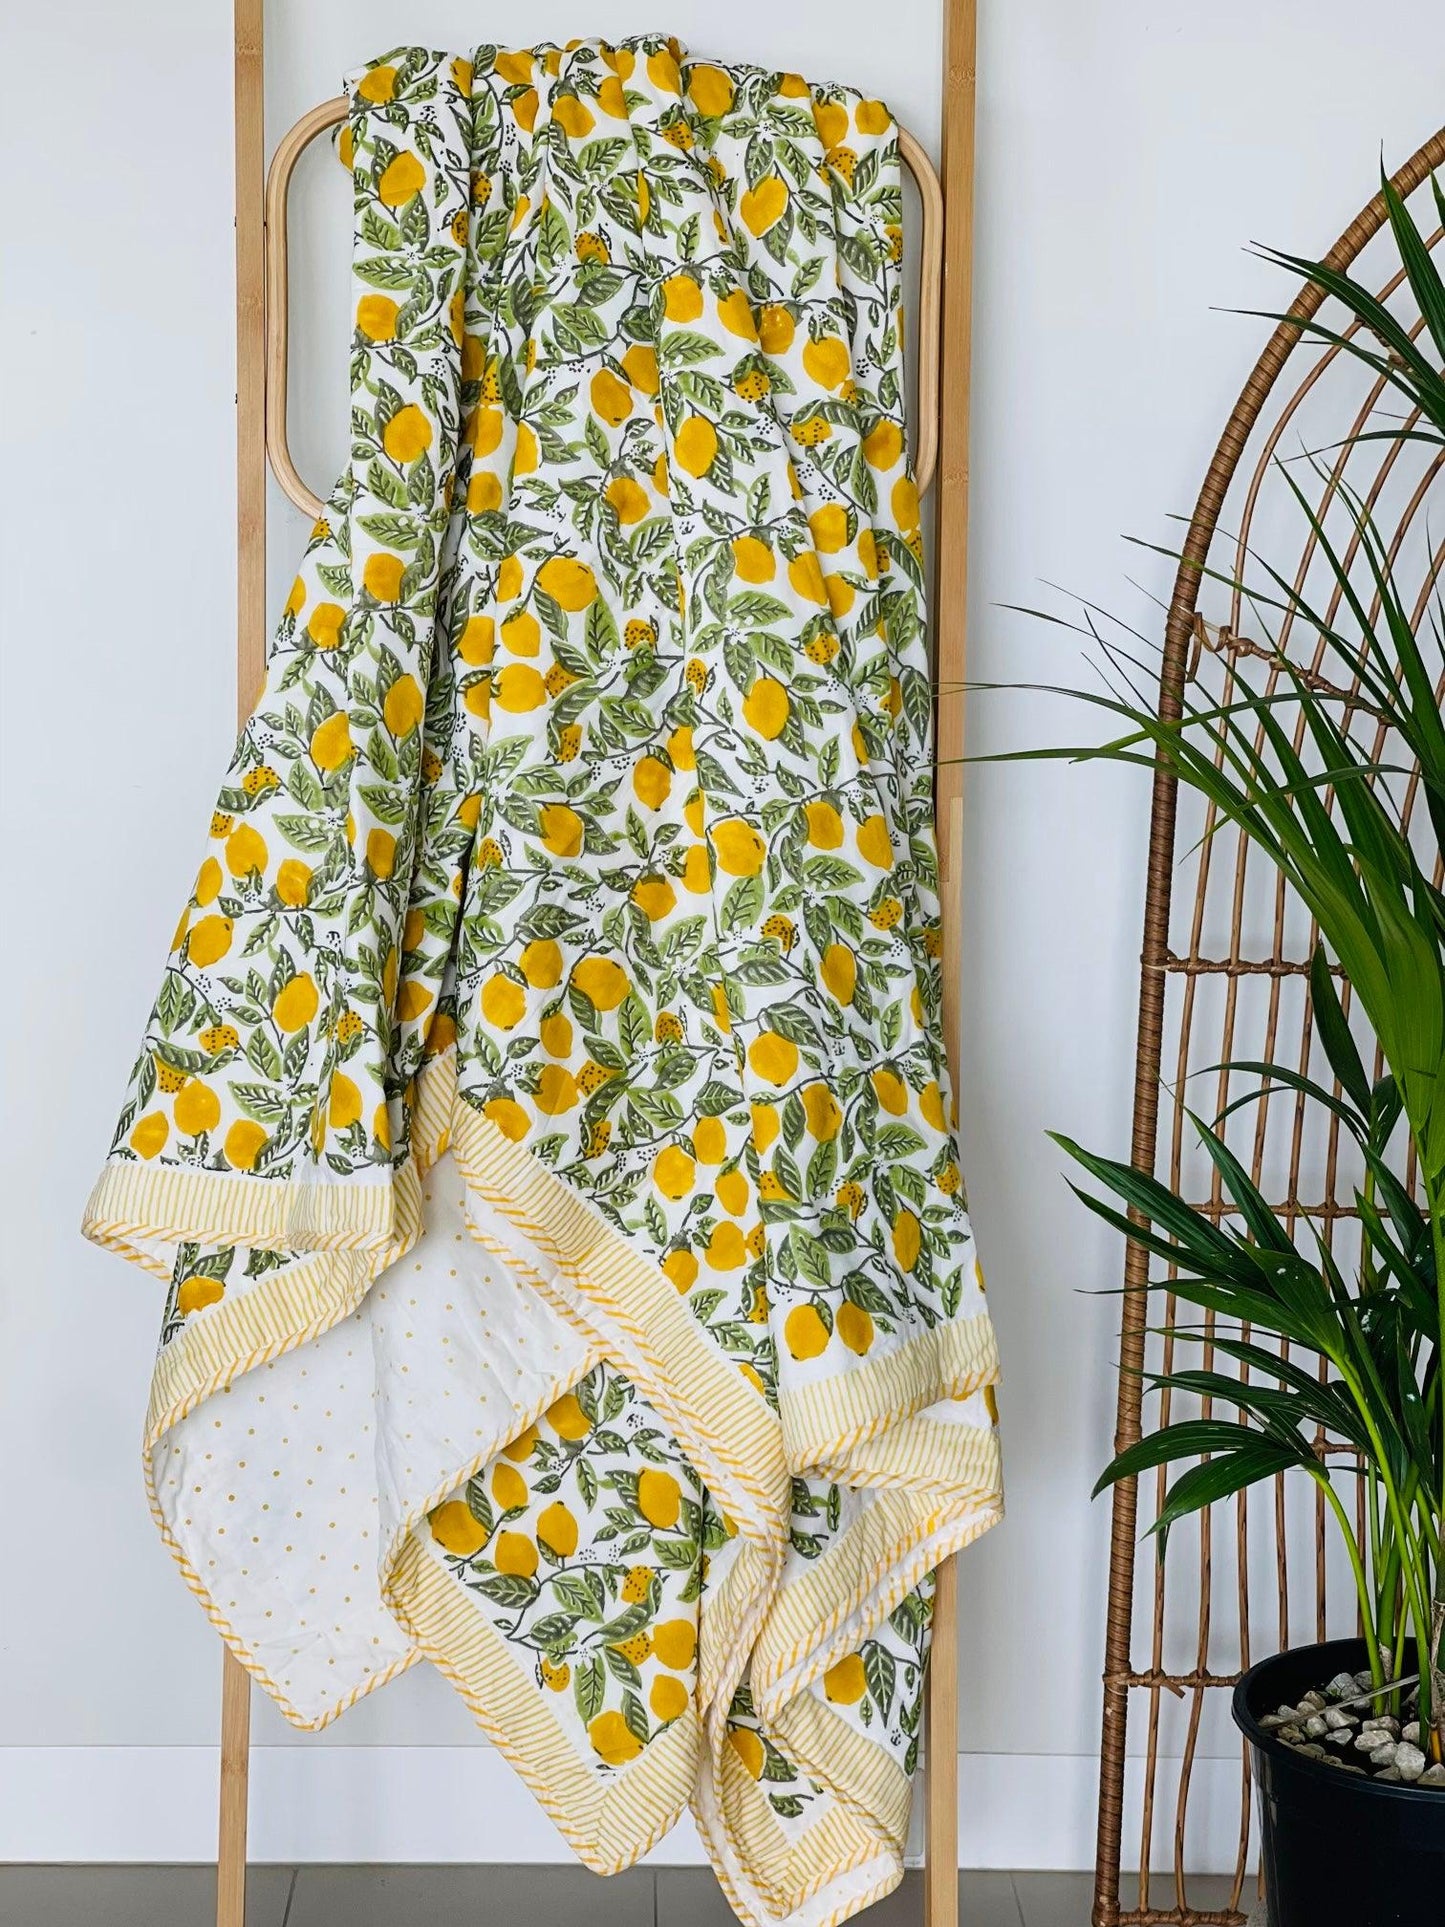 Cotton Filled Lemon Print Quilt: Cozy Cotton Blanket with Artisanal Block Print - Rooii by Tuvisha